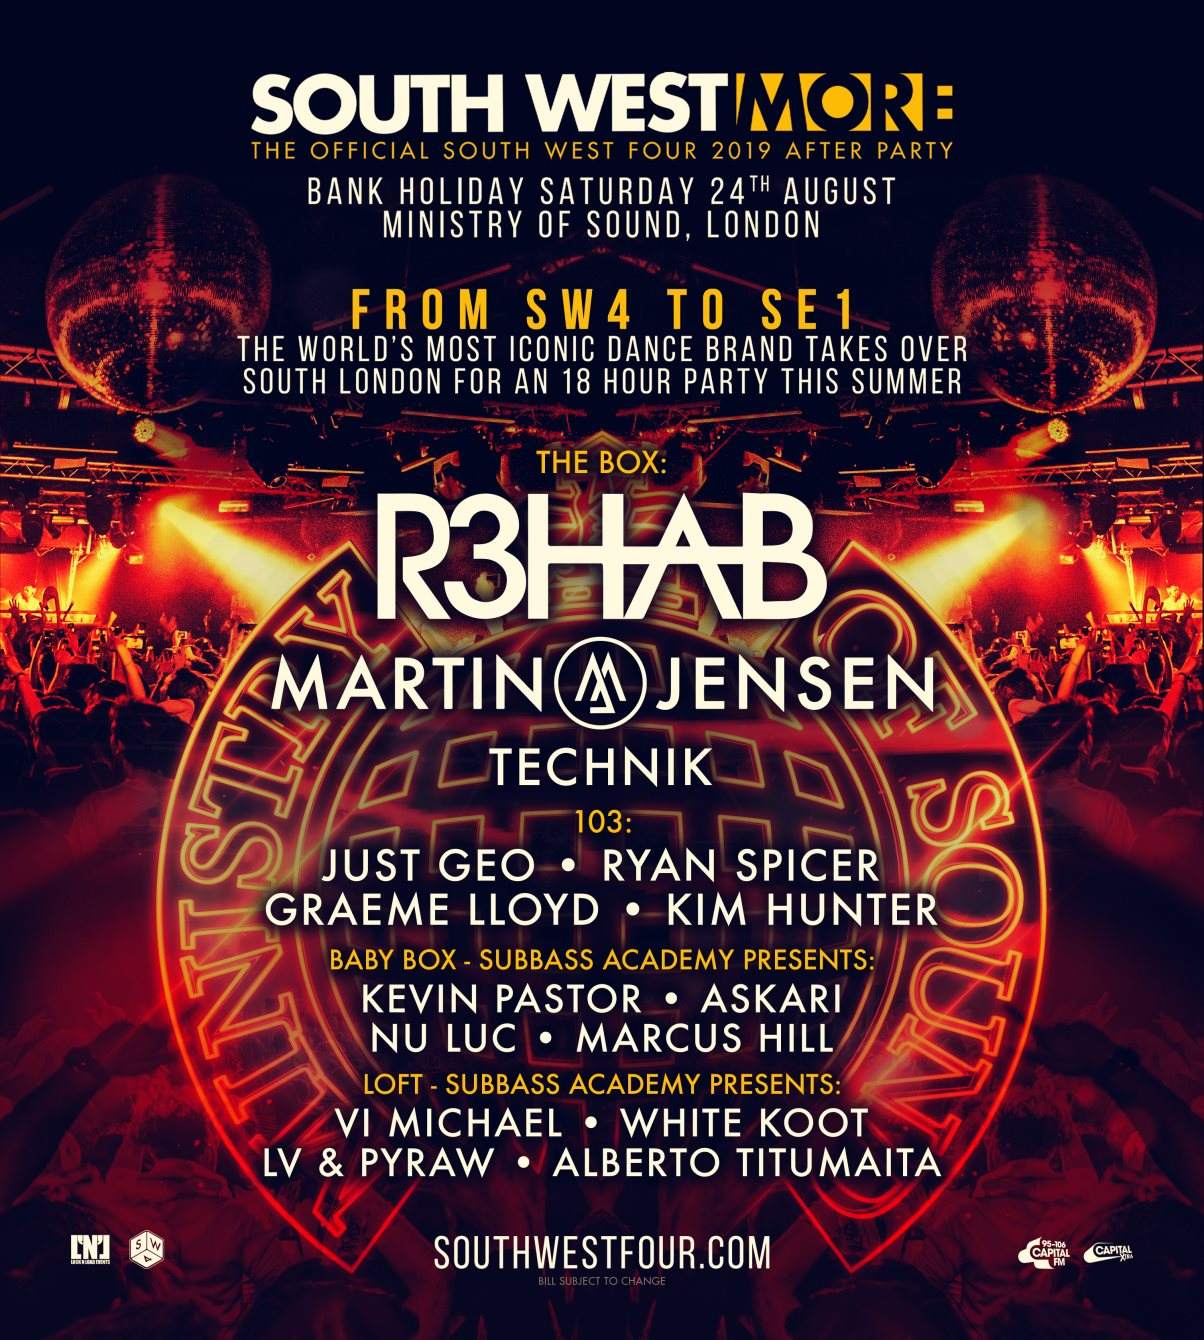 Official SW4 Afterparty: South West More - フライヤー表